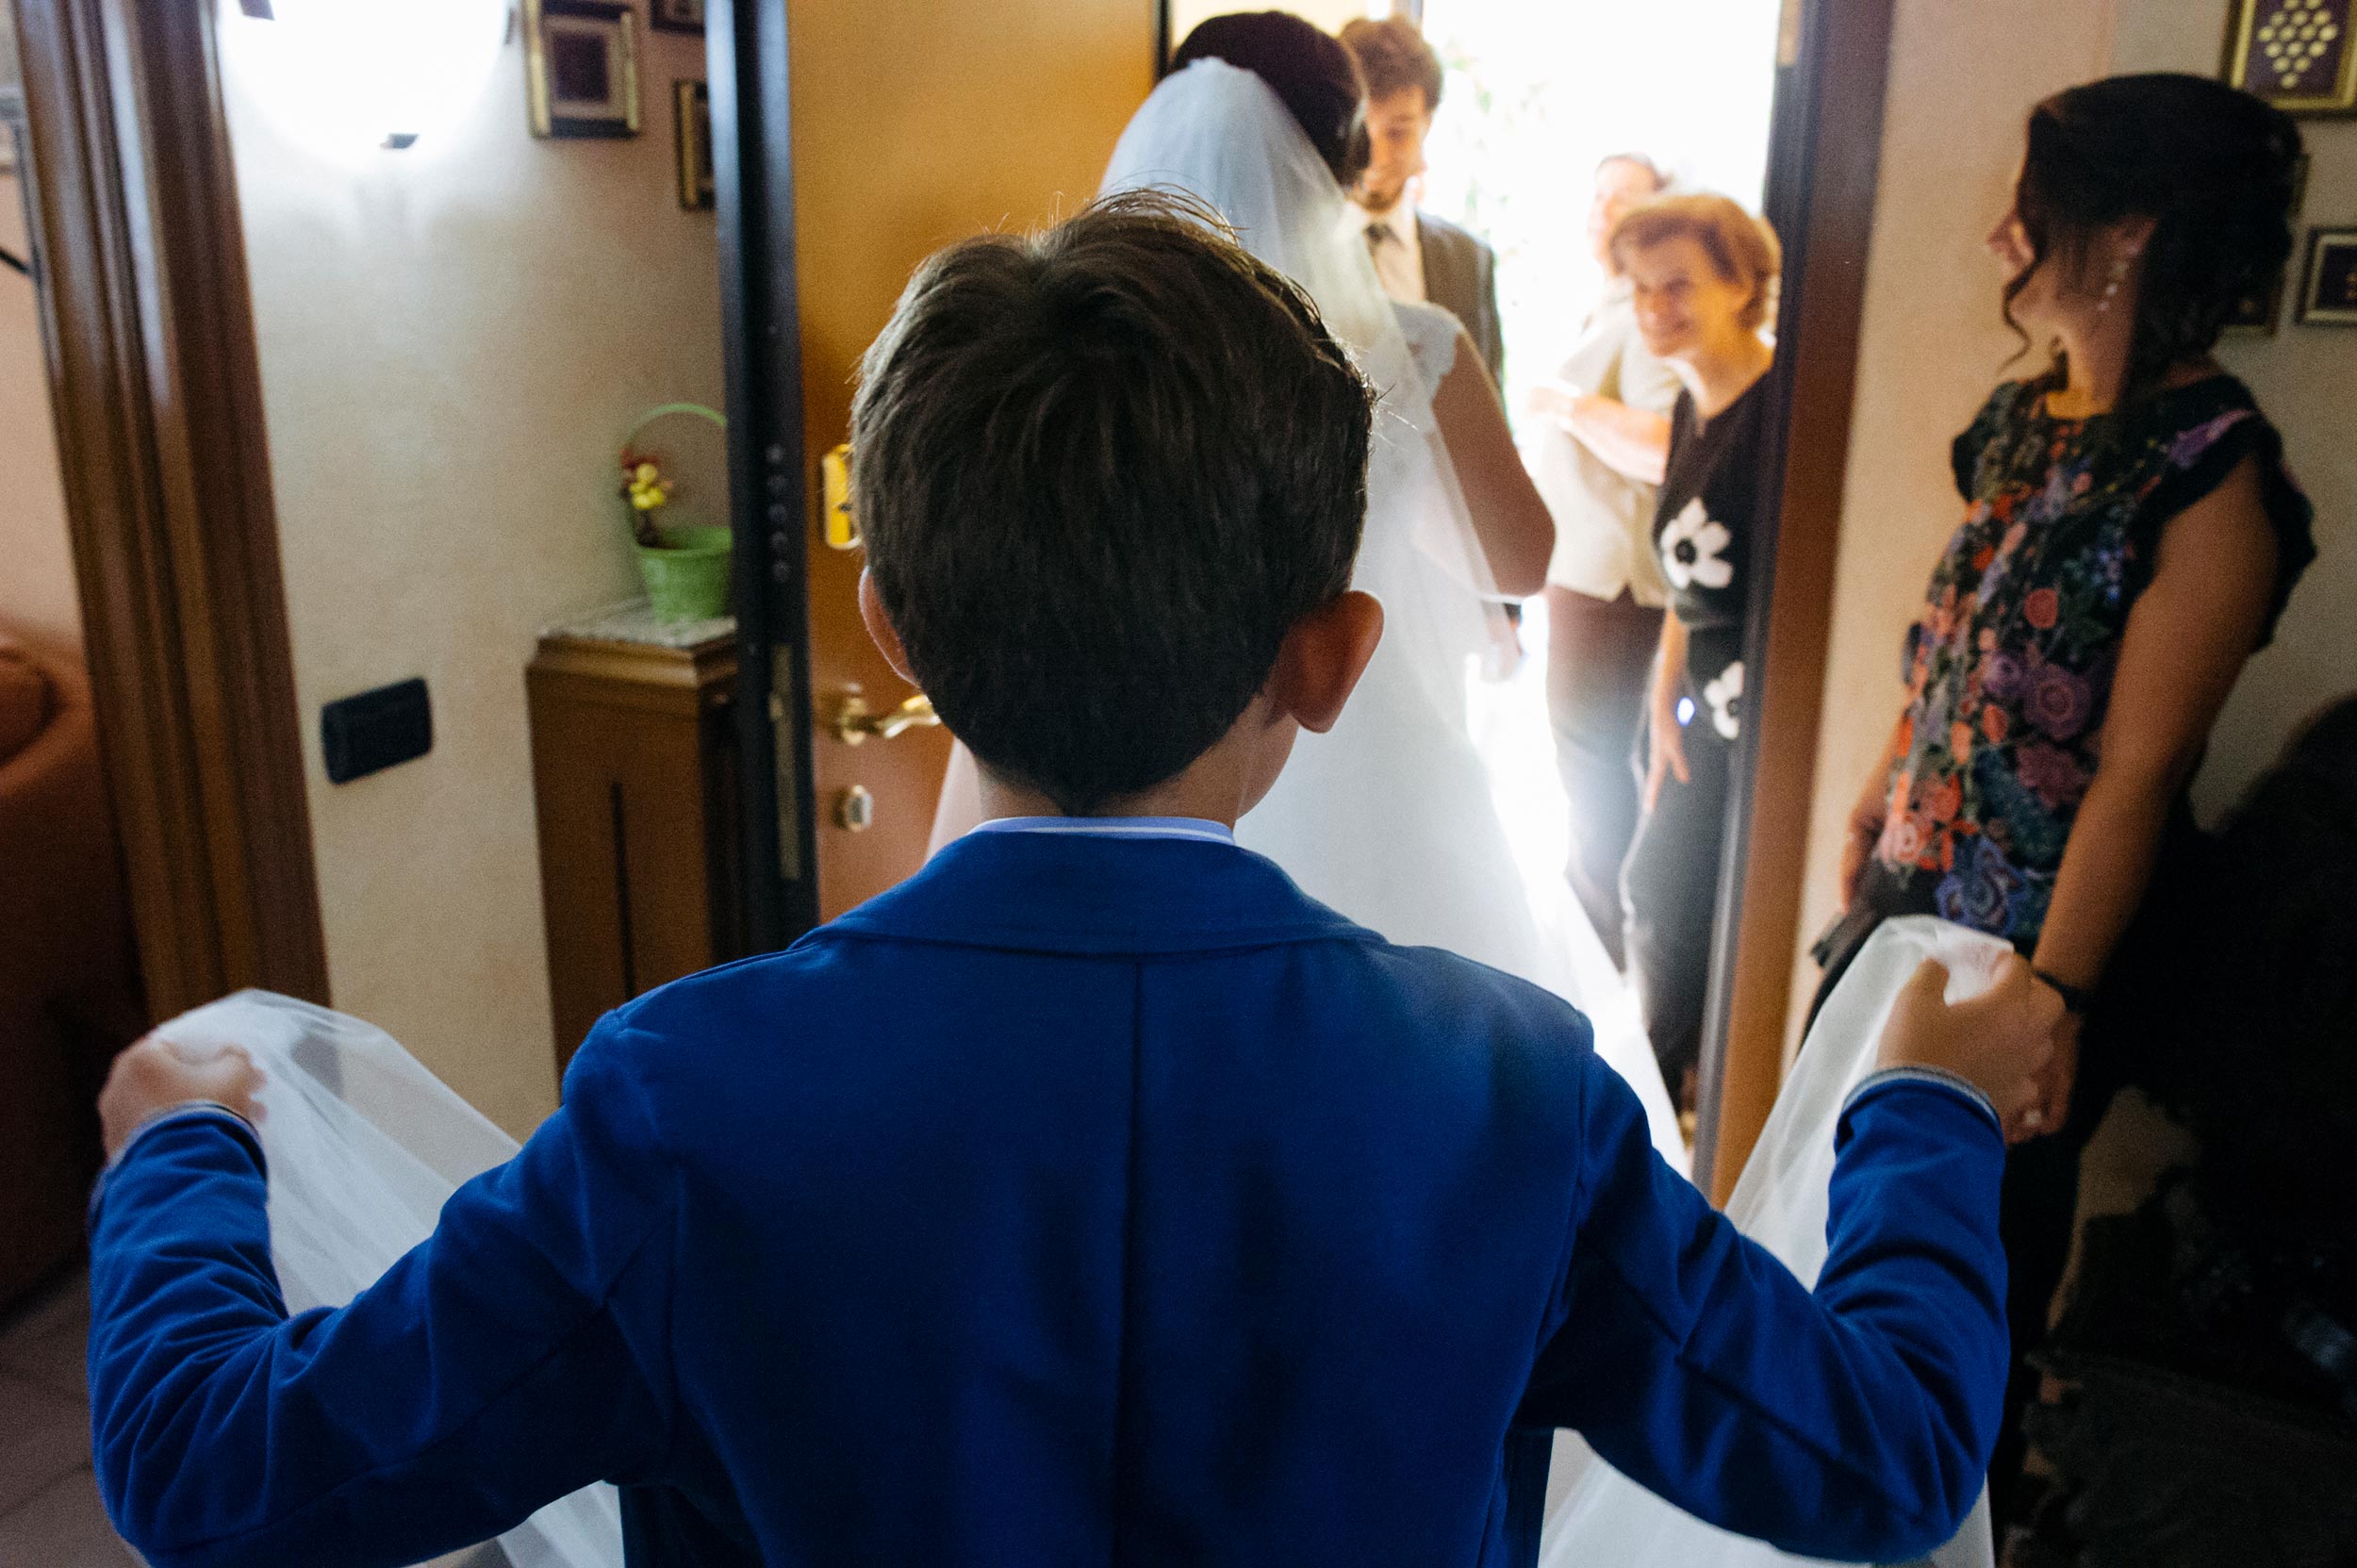 kid-holding-bridal-veil-helping-the-bride-going-out-of-home.jpg